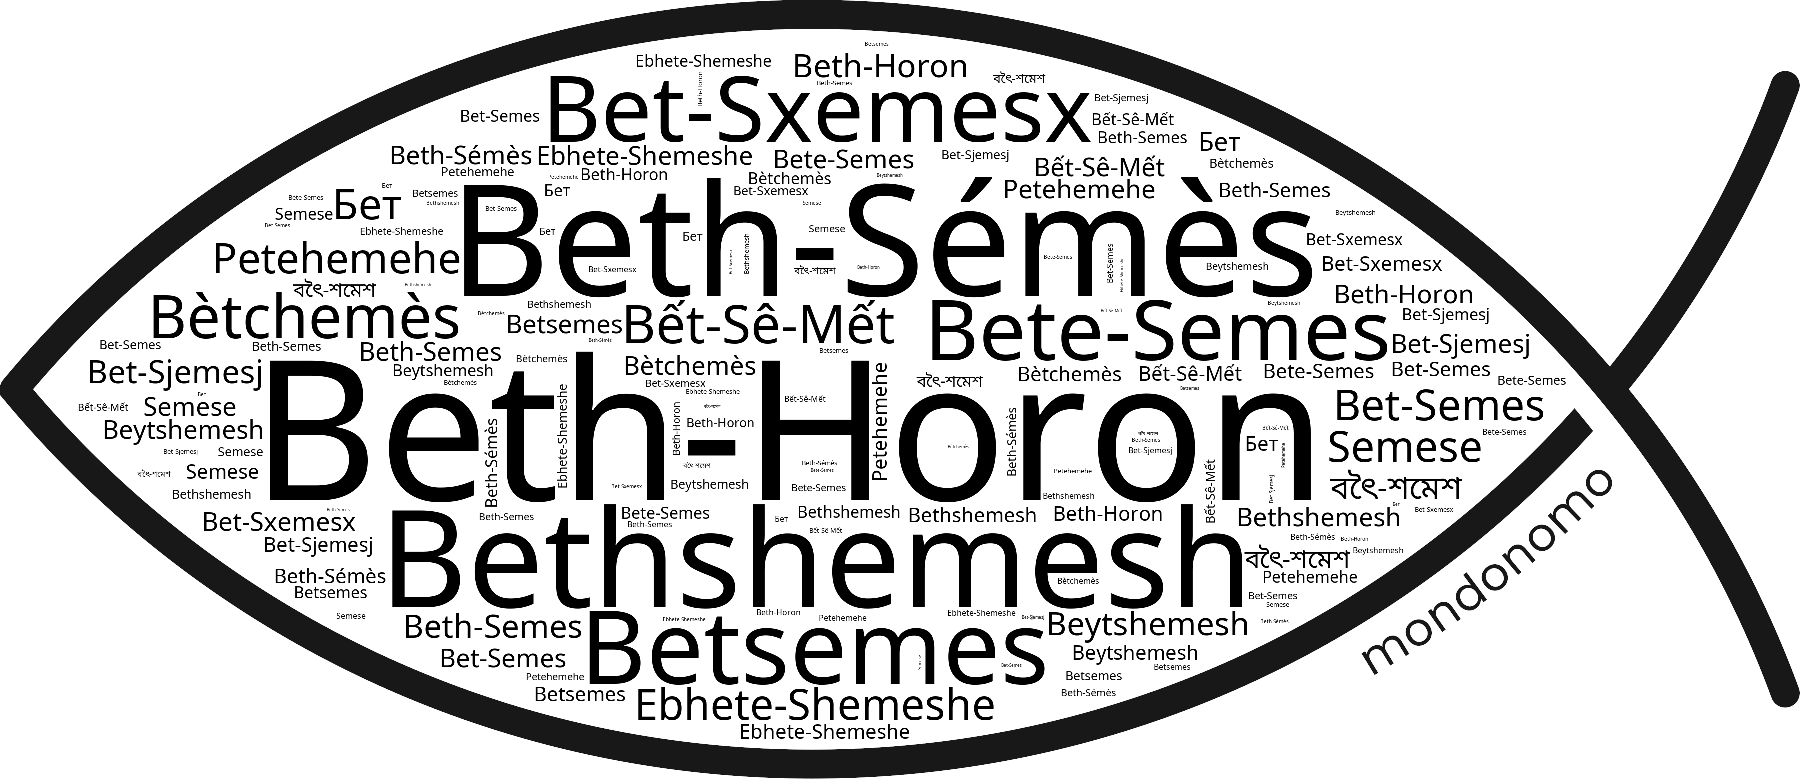 Name Beth-Horon in the world's Bibles